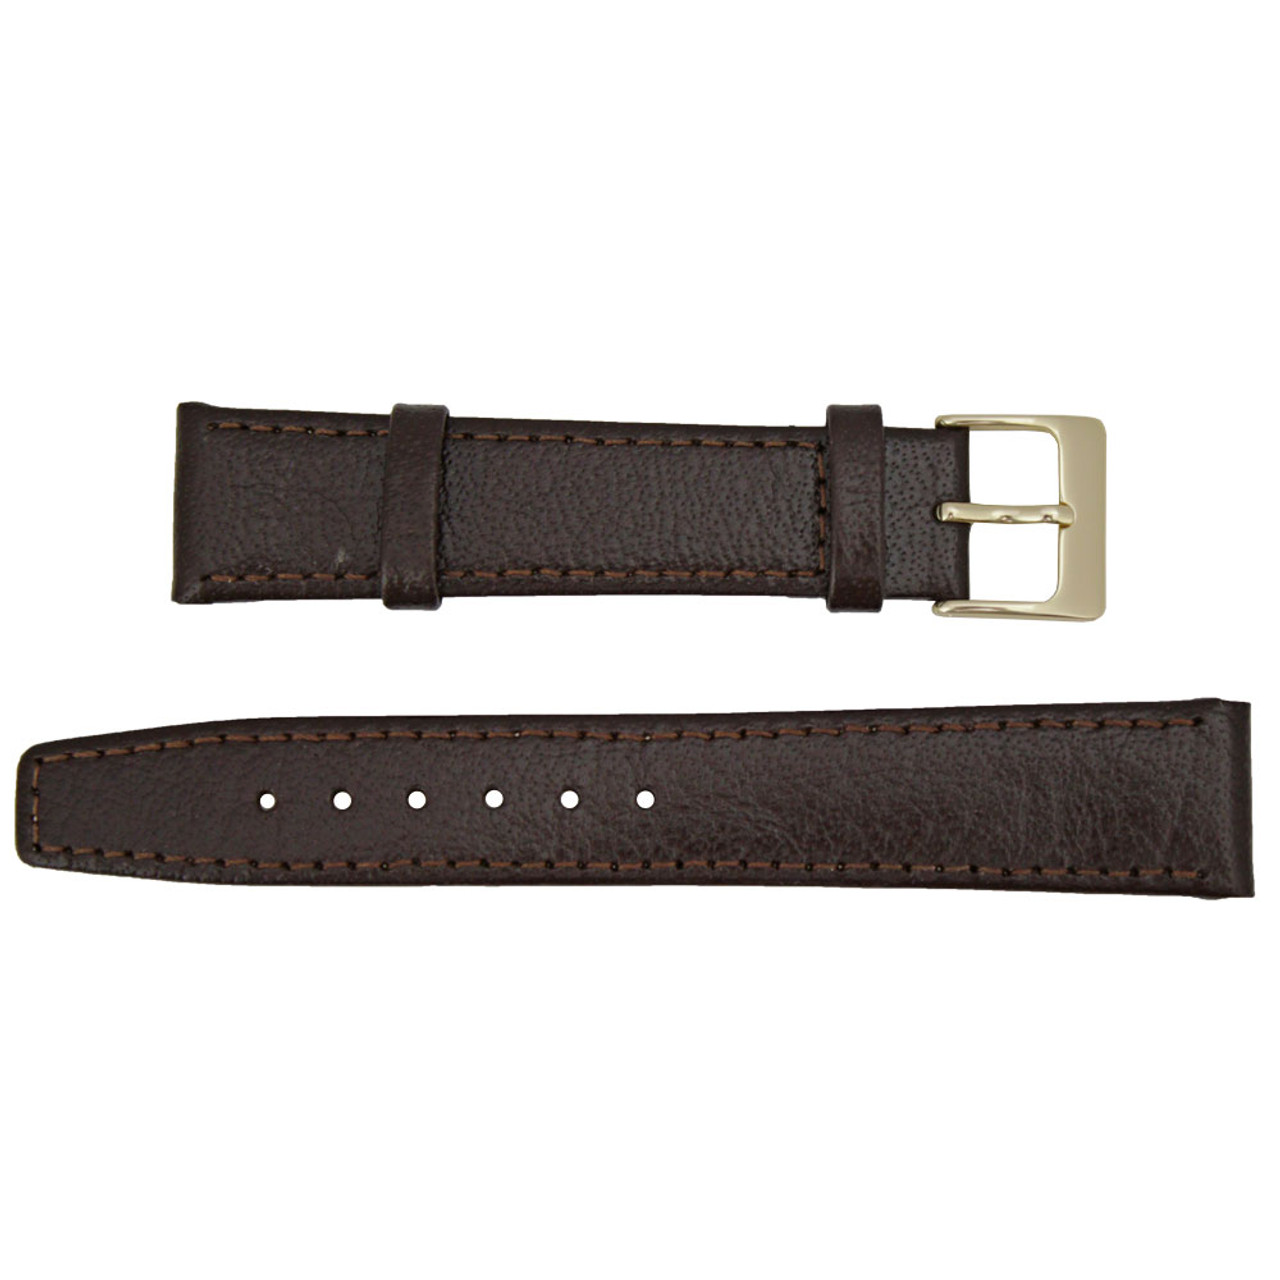 18mm Brown Genuine Leather Watchband | Center Padded Replacement Wrist  Strap with Creamy White Colored Stitching that brings New Life to Any Watch